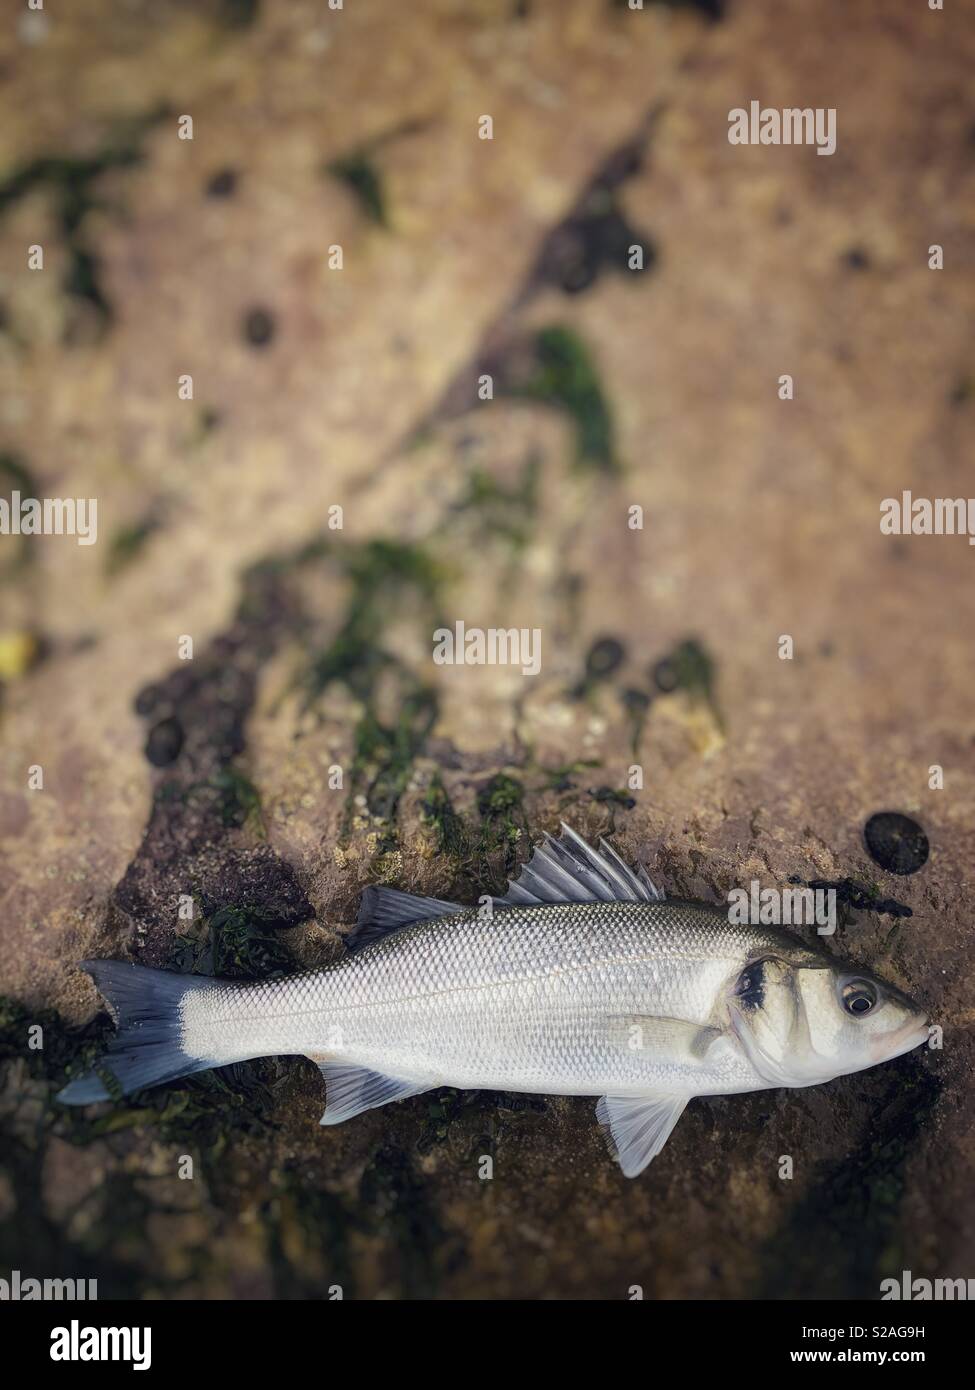 Freshly caught live Sea bass ( Dicentrarchus labrax) on a rock prior to being returned to the sea. Stock Photo